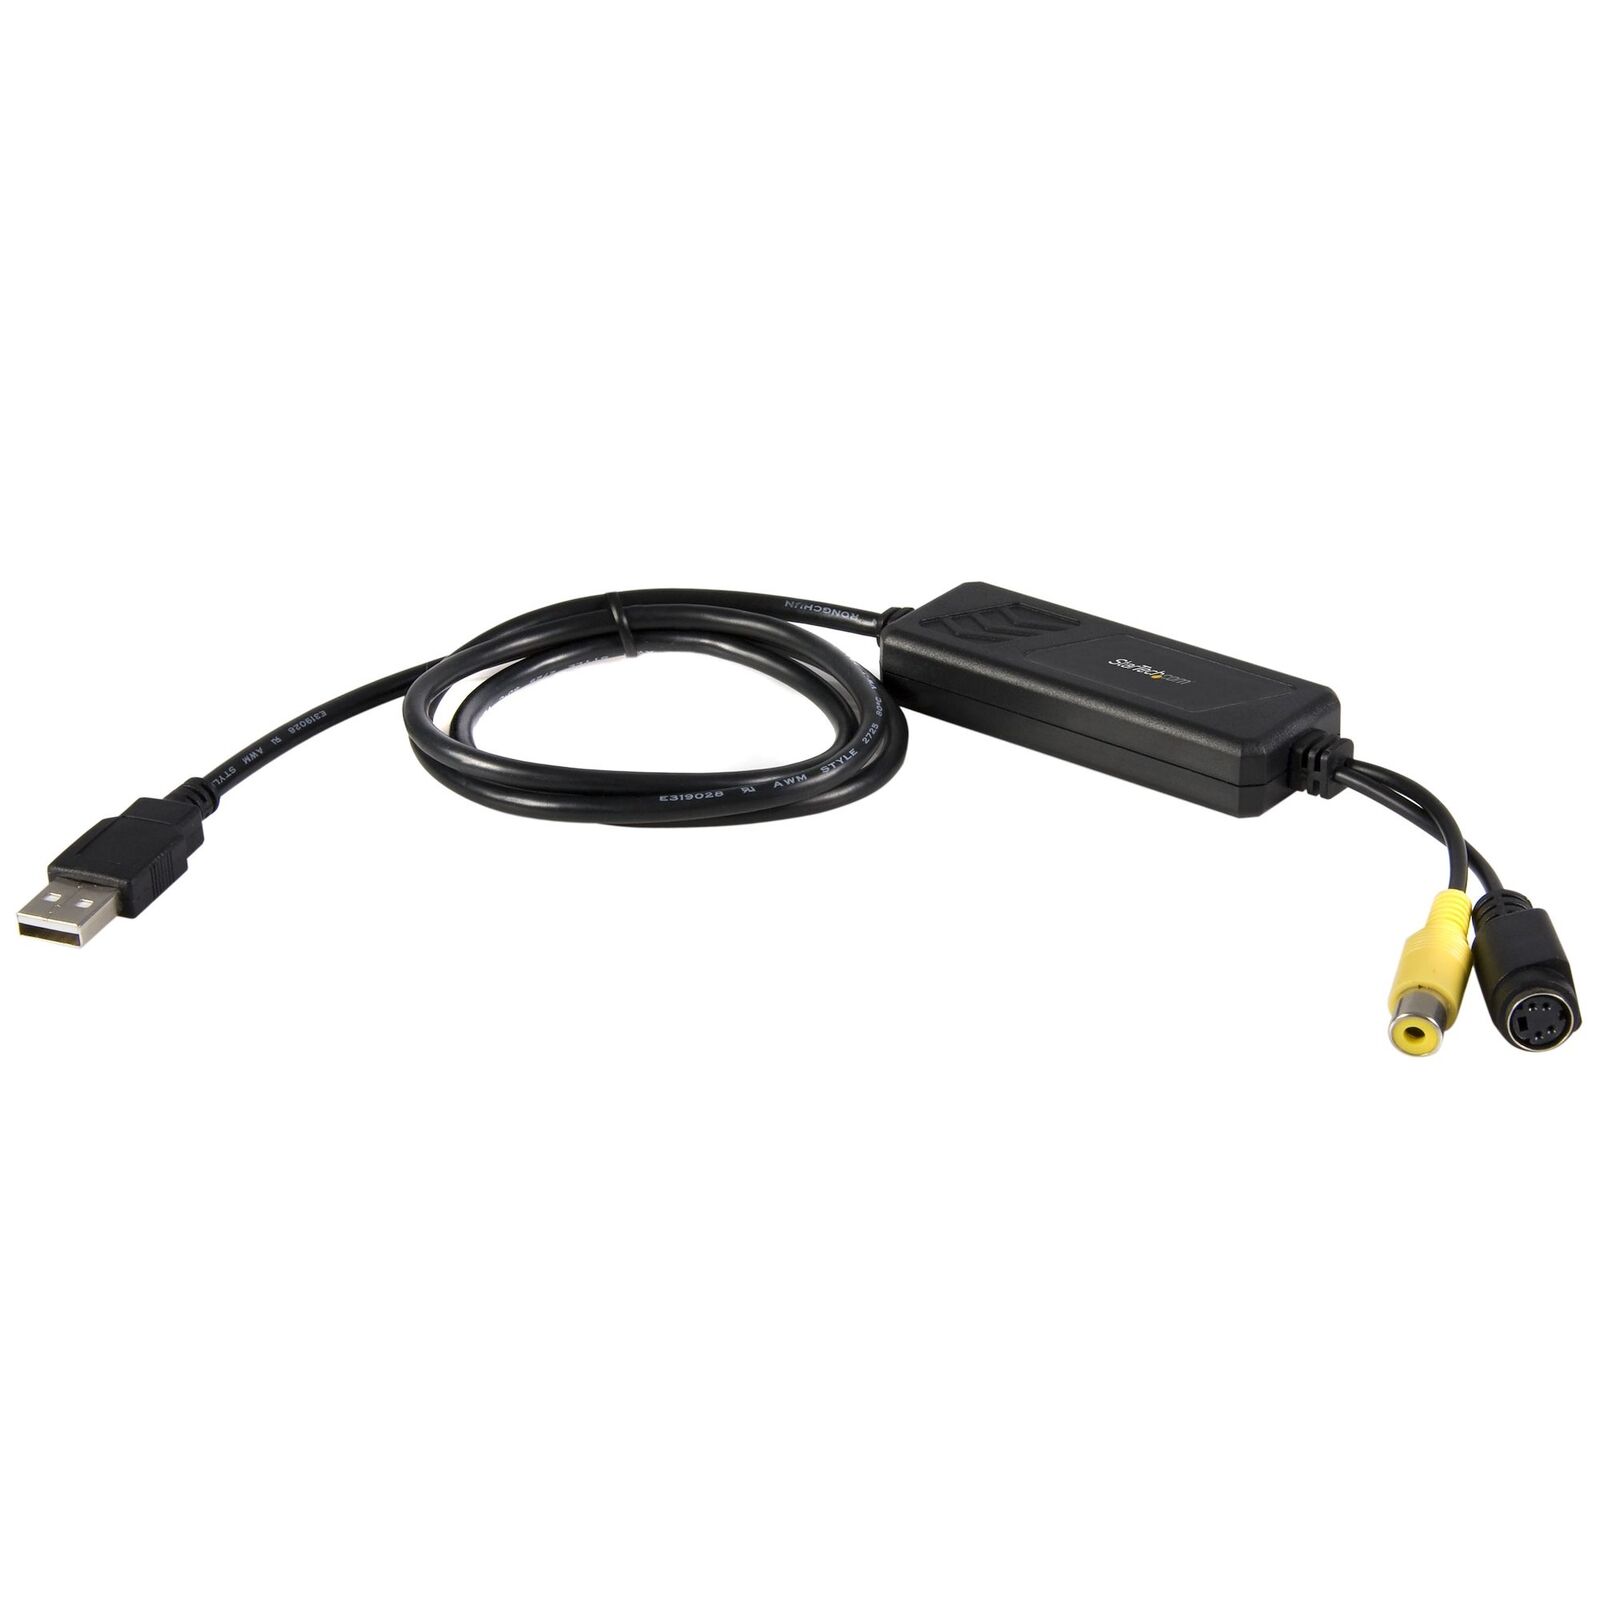 StarTech.com SVID2USB2NS USB 2.0 S-Video and Composite Video Capture Cable